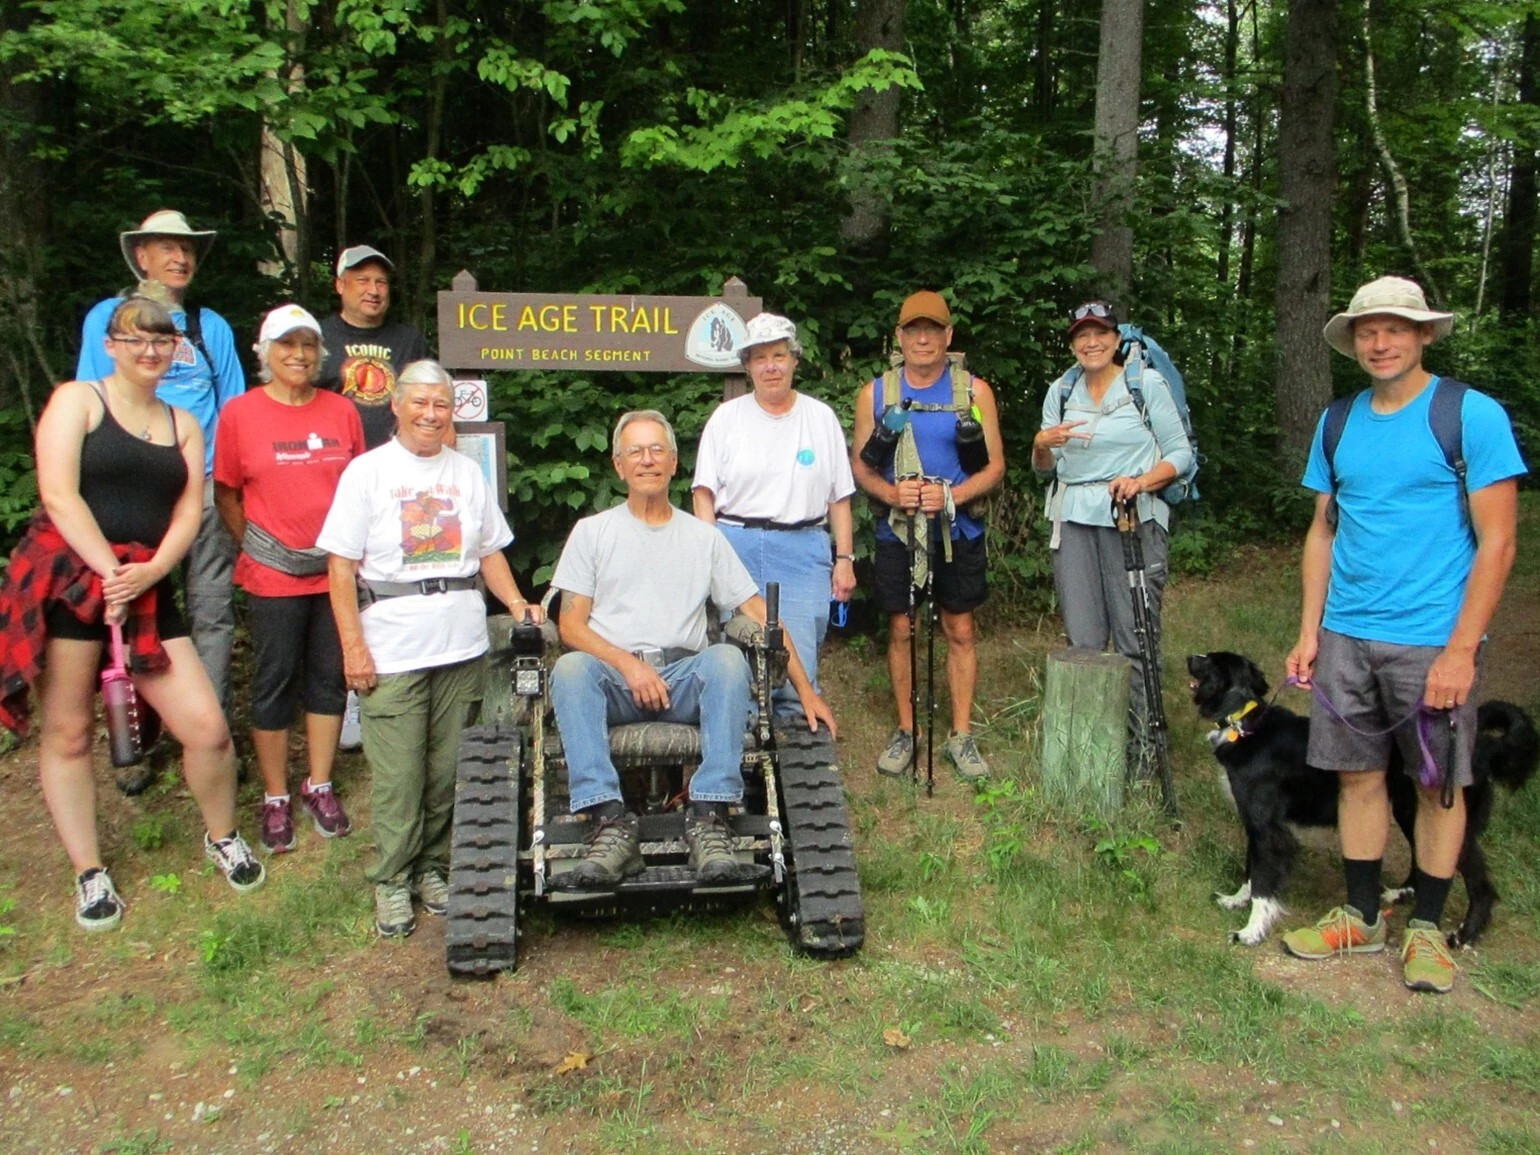 group of people pose next to man in adaptive wheelchair in front of ice age trail sign